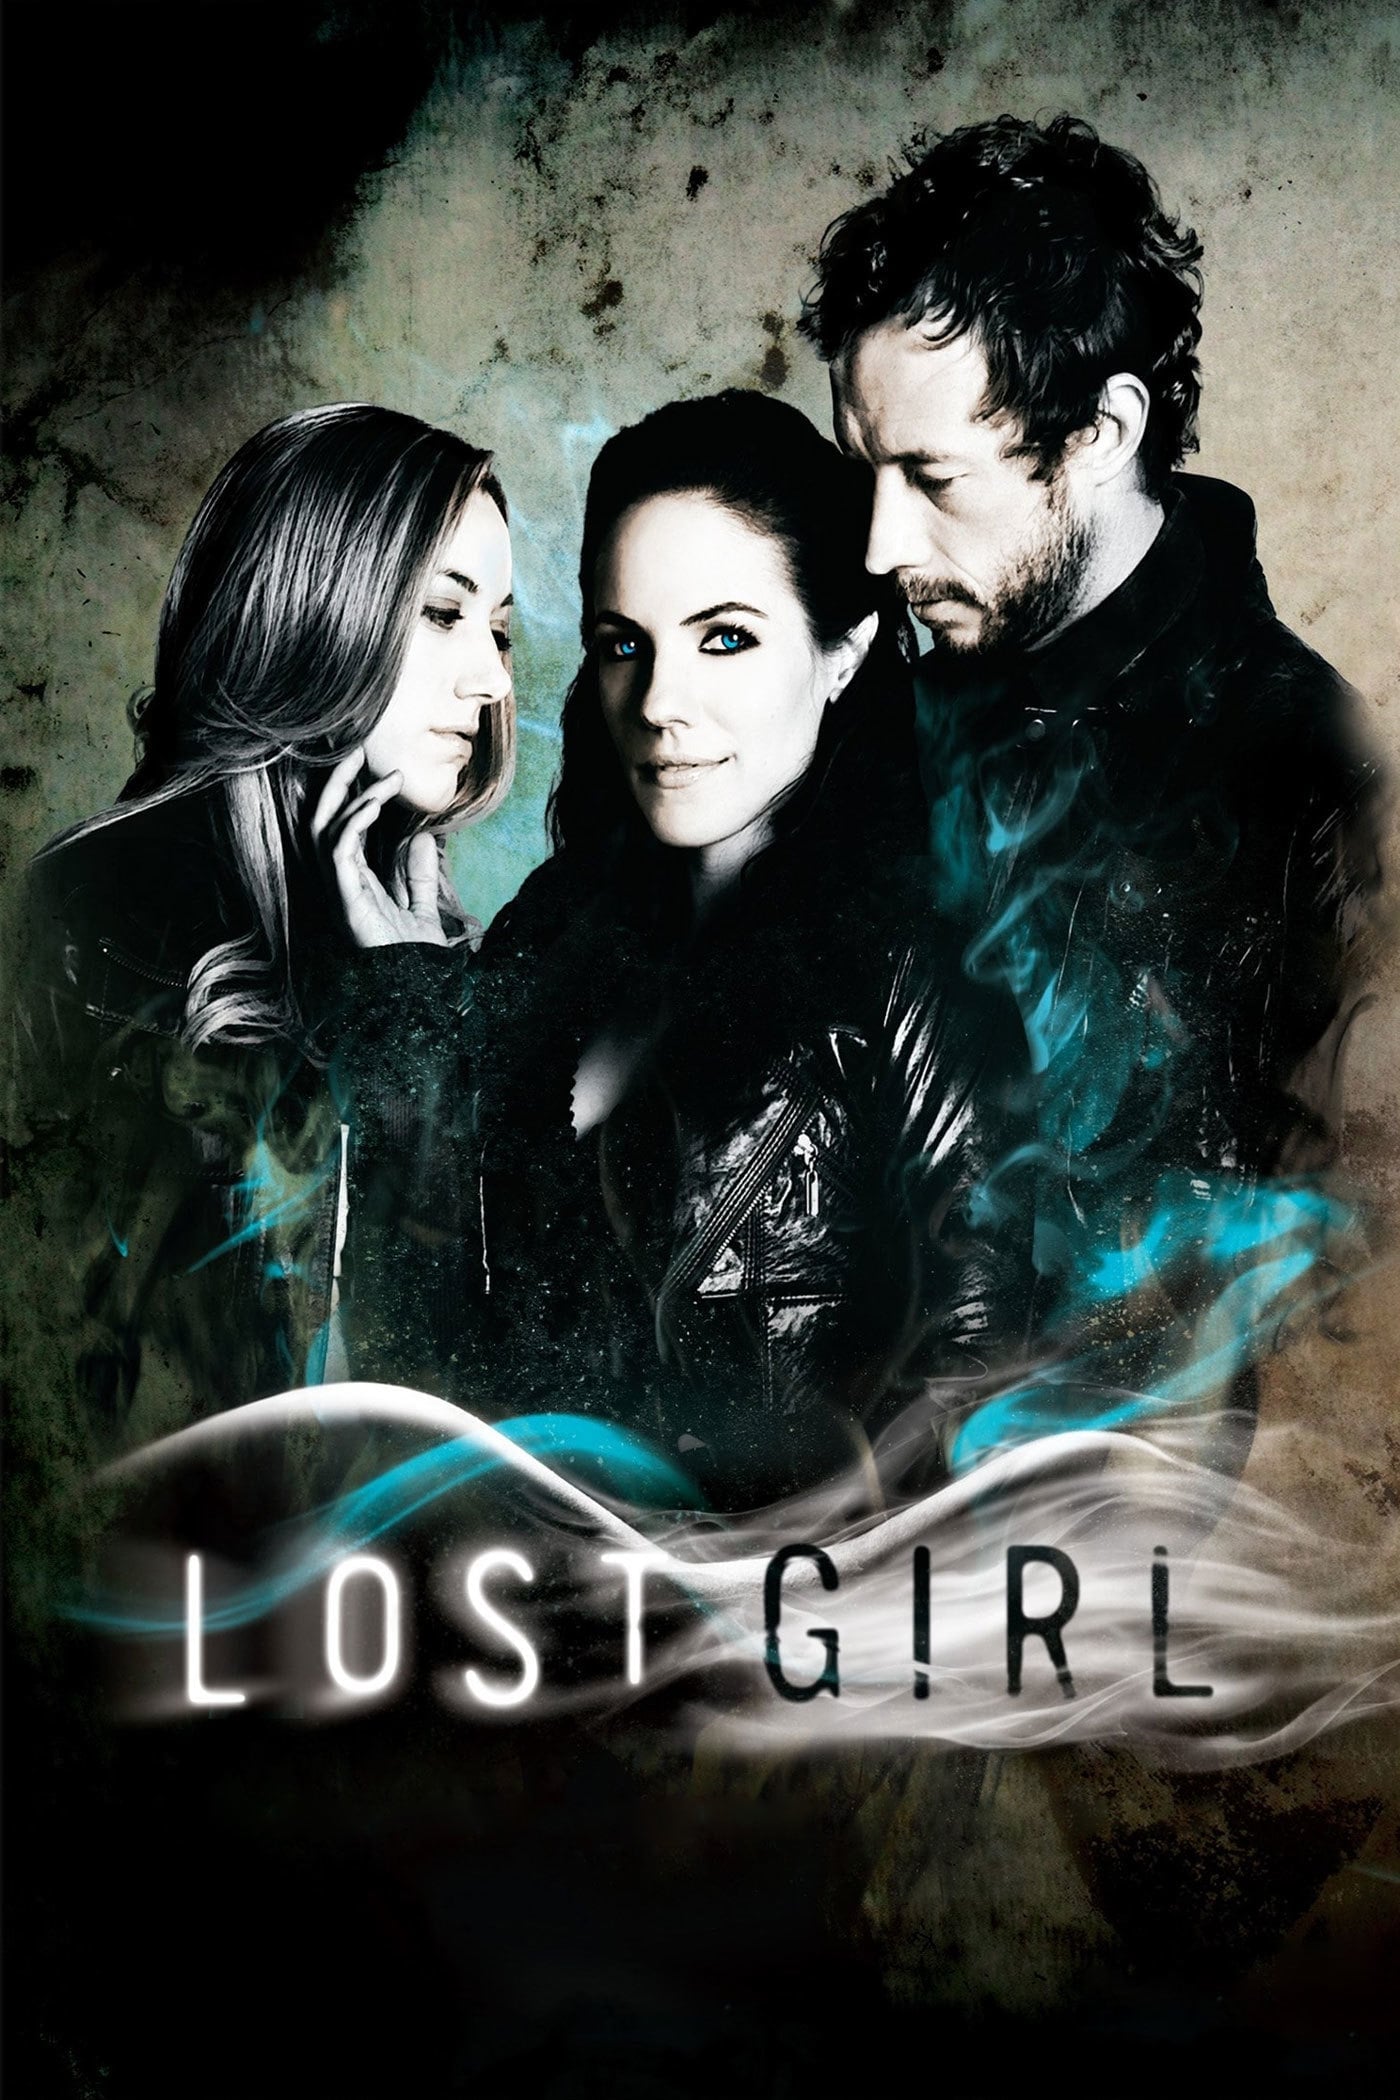 Lost Girl TV Shows About Interspecies Romance